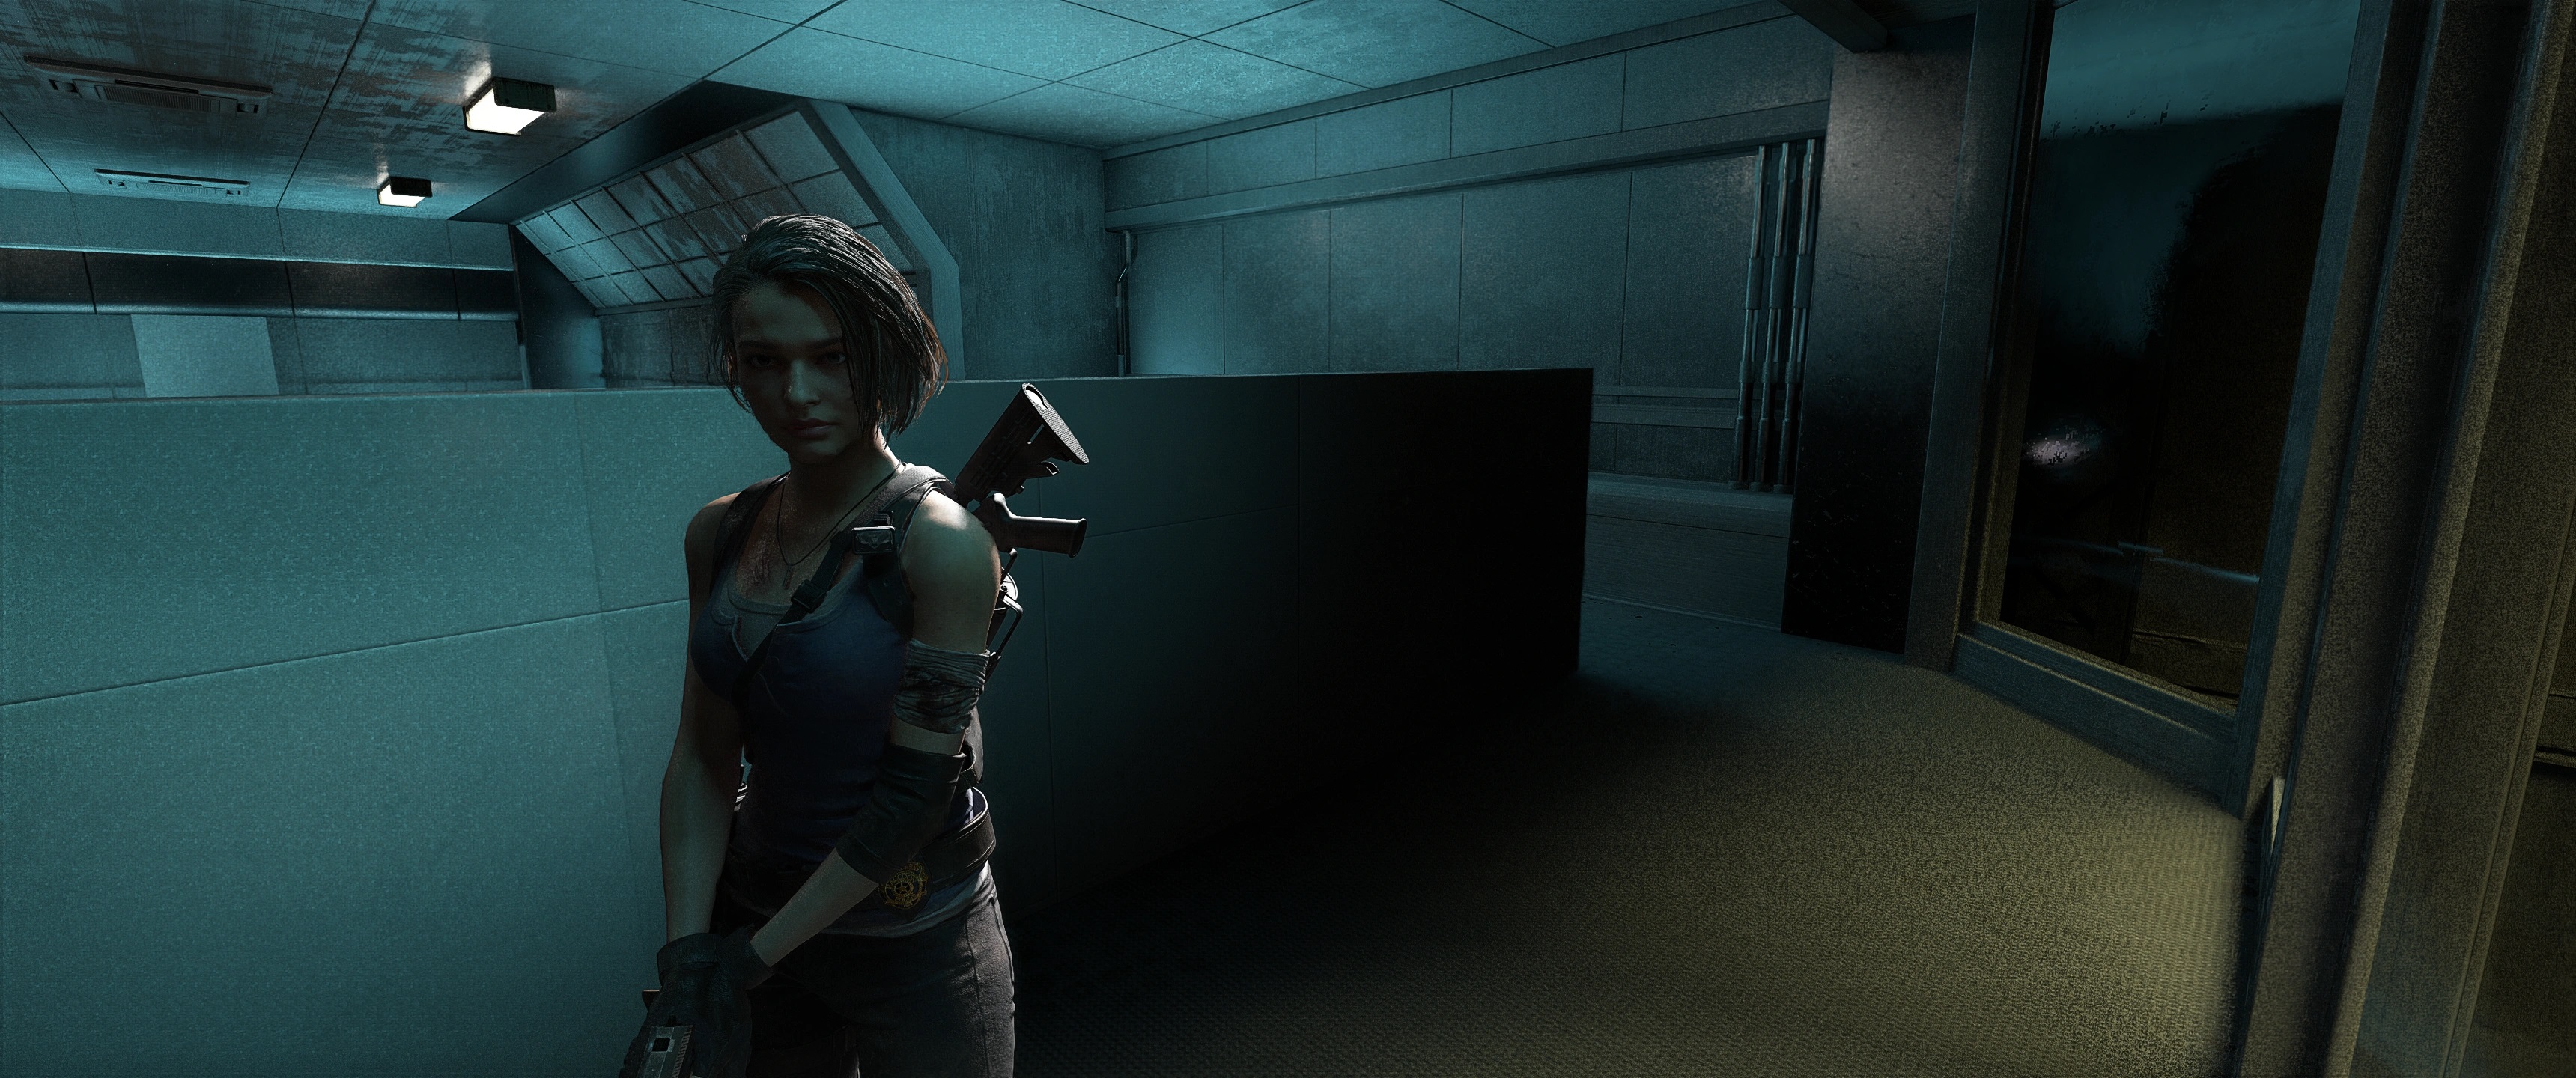 Resident-Evil-games-with-Path-Tracing-5.jpg